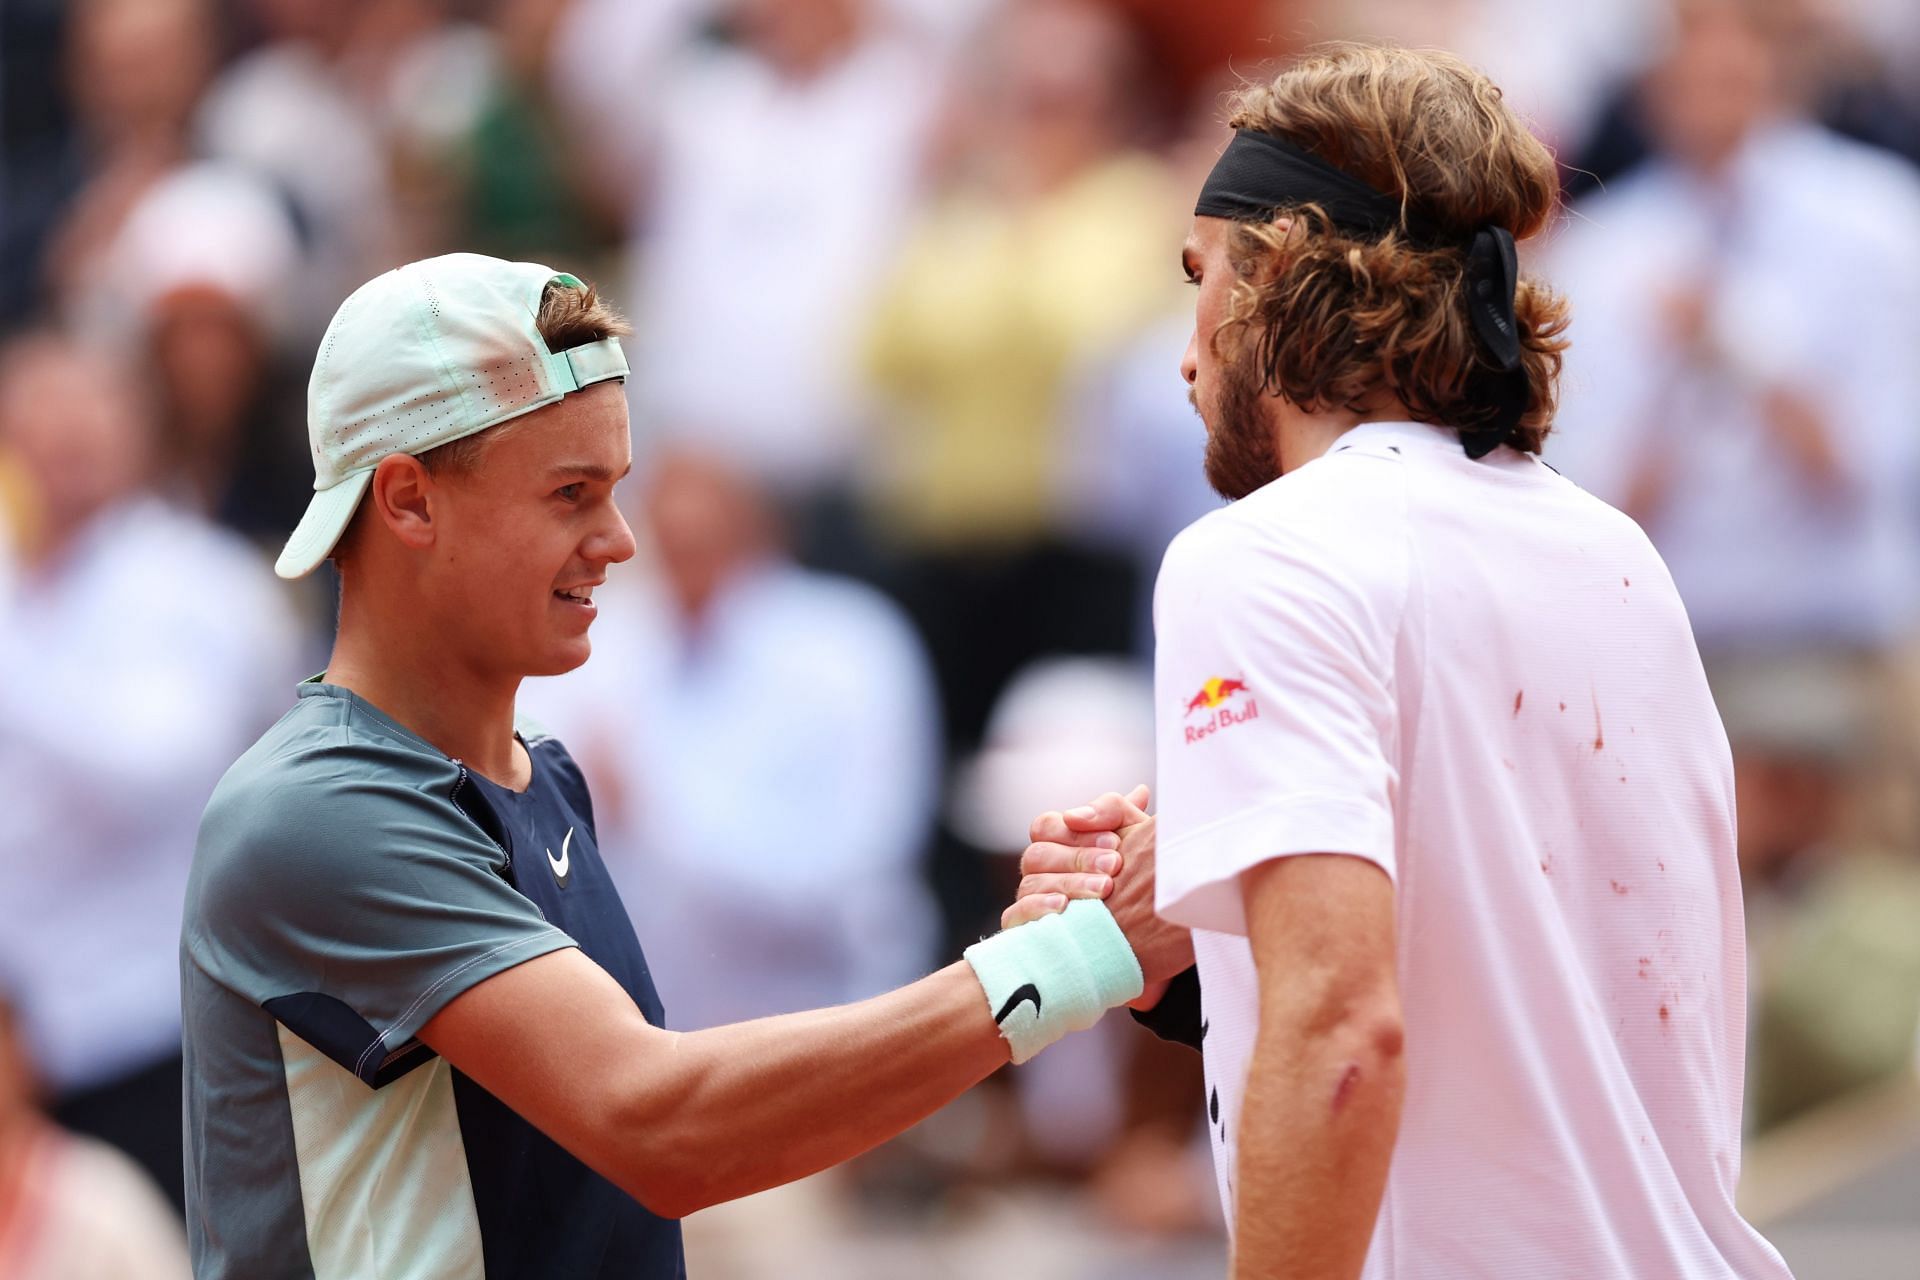 Holger Rune and Stefanos Tsitsipas shake hands after thier match at the 2022 French Open